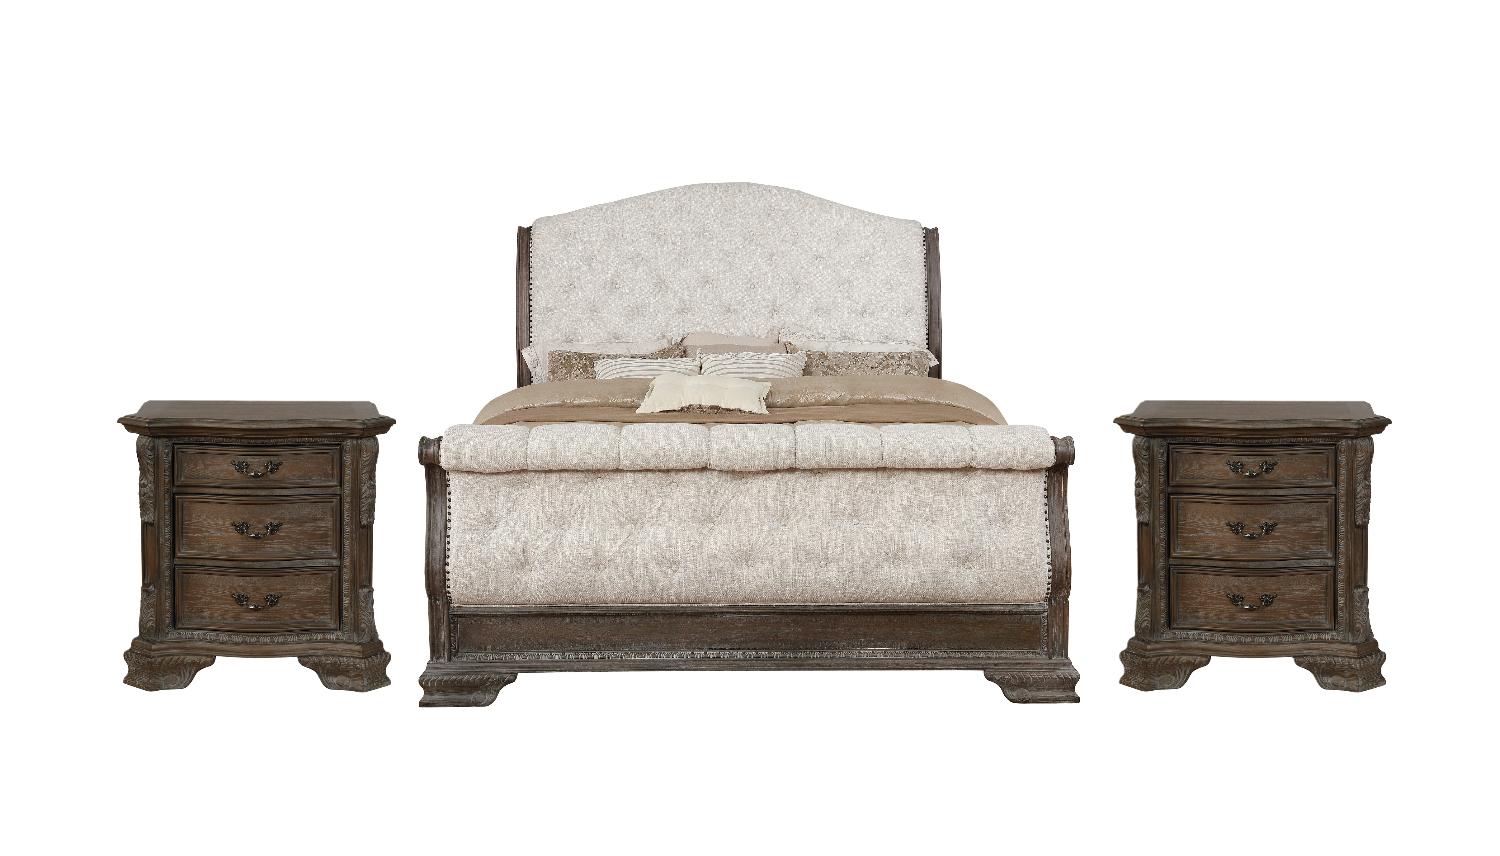 Traditional, Vintage Panel Bedroom Set Sheffield B1120-Q-Bed-3pcs in Beige / Brown Fabric